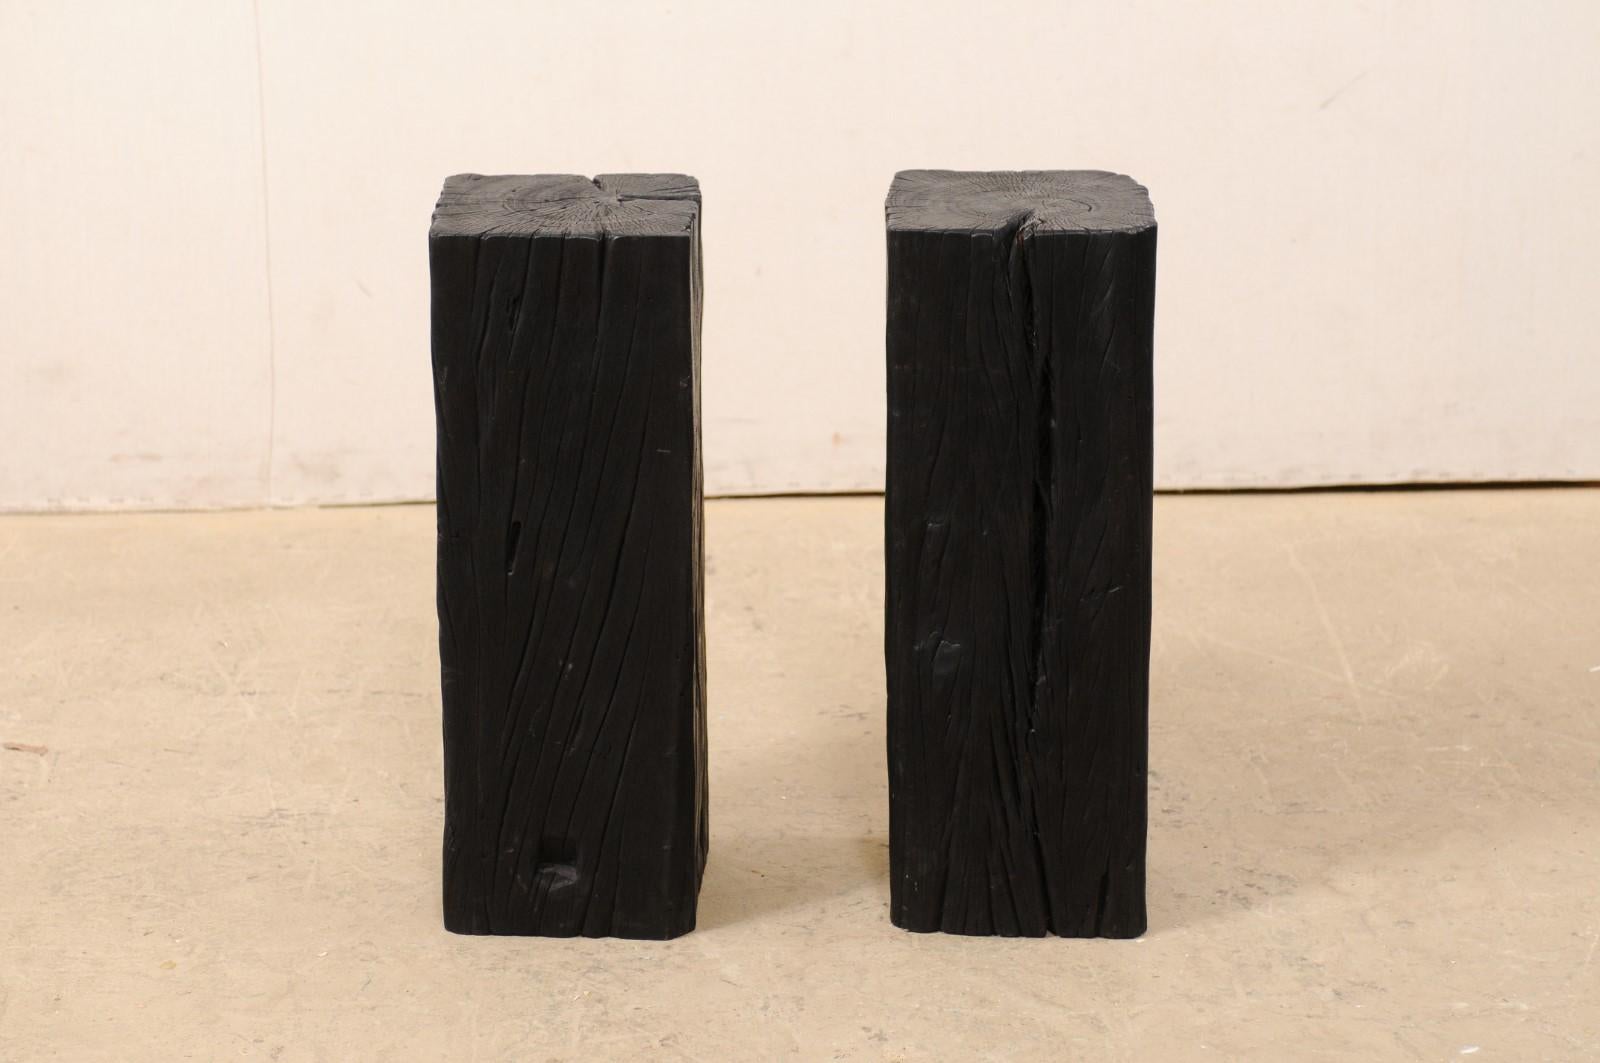 Pair of Tall Carbonized Wood Square Shaped Pedestals, Rich Black Color 3